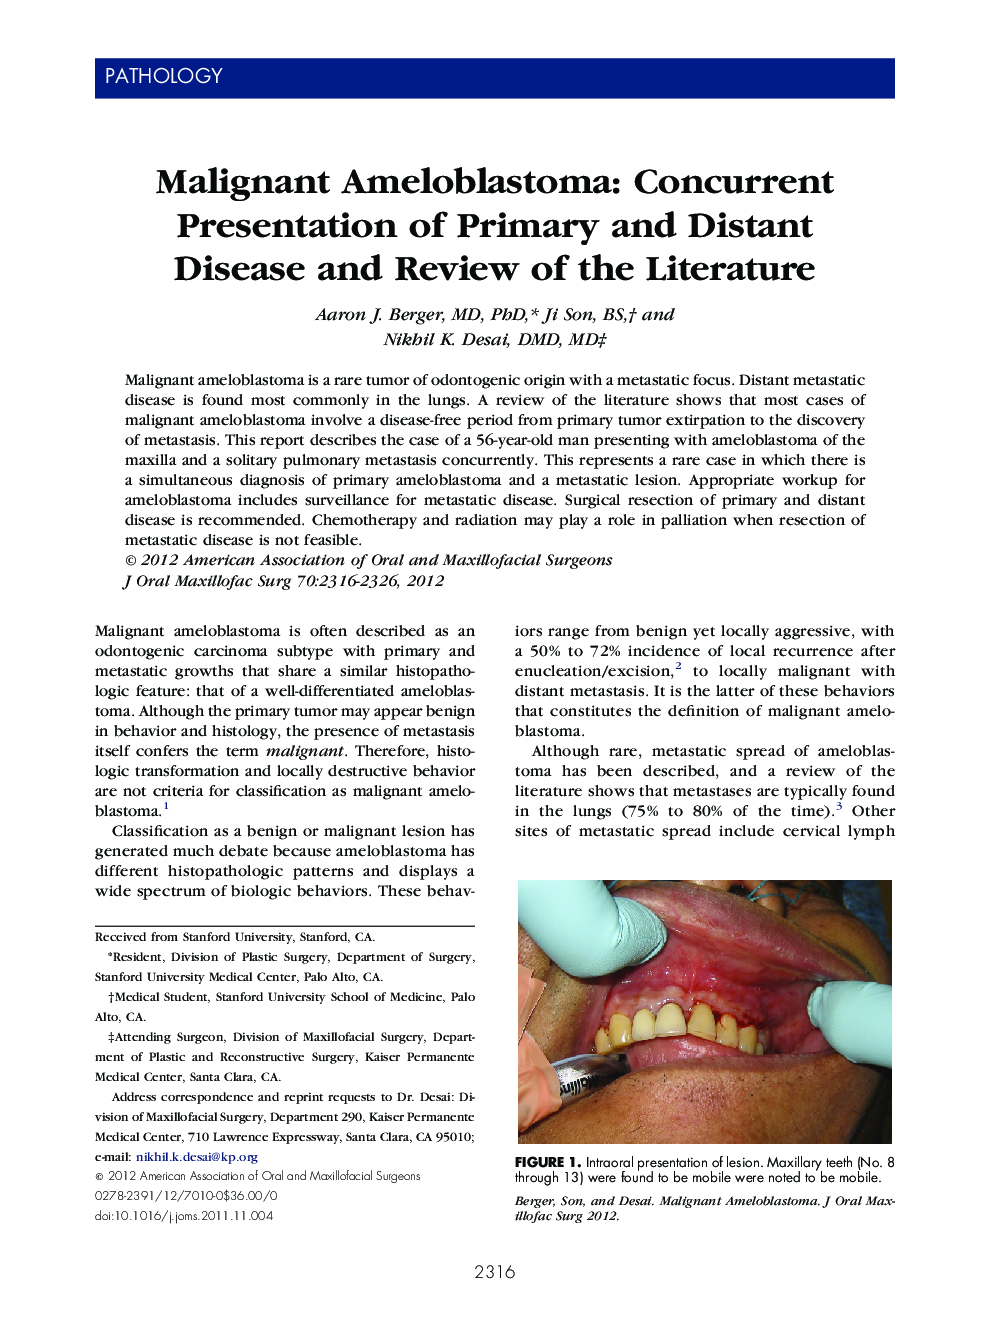 Malignant Ameloblastoma: Concurrent Presentation of Primary and Distant Disease and Review of the Literature